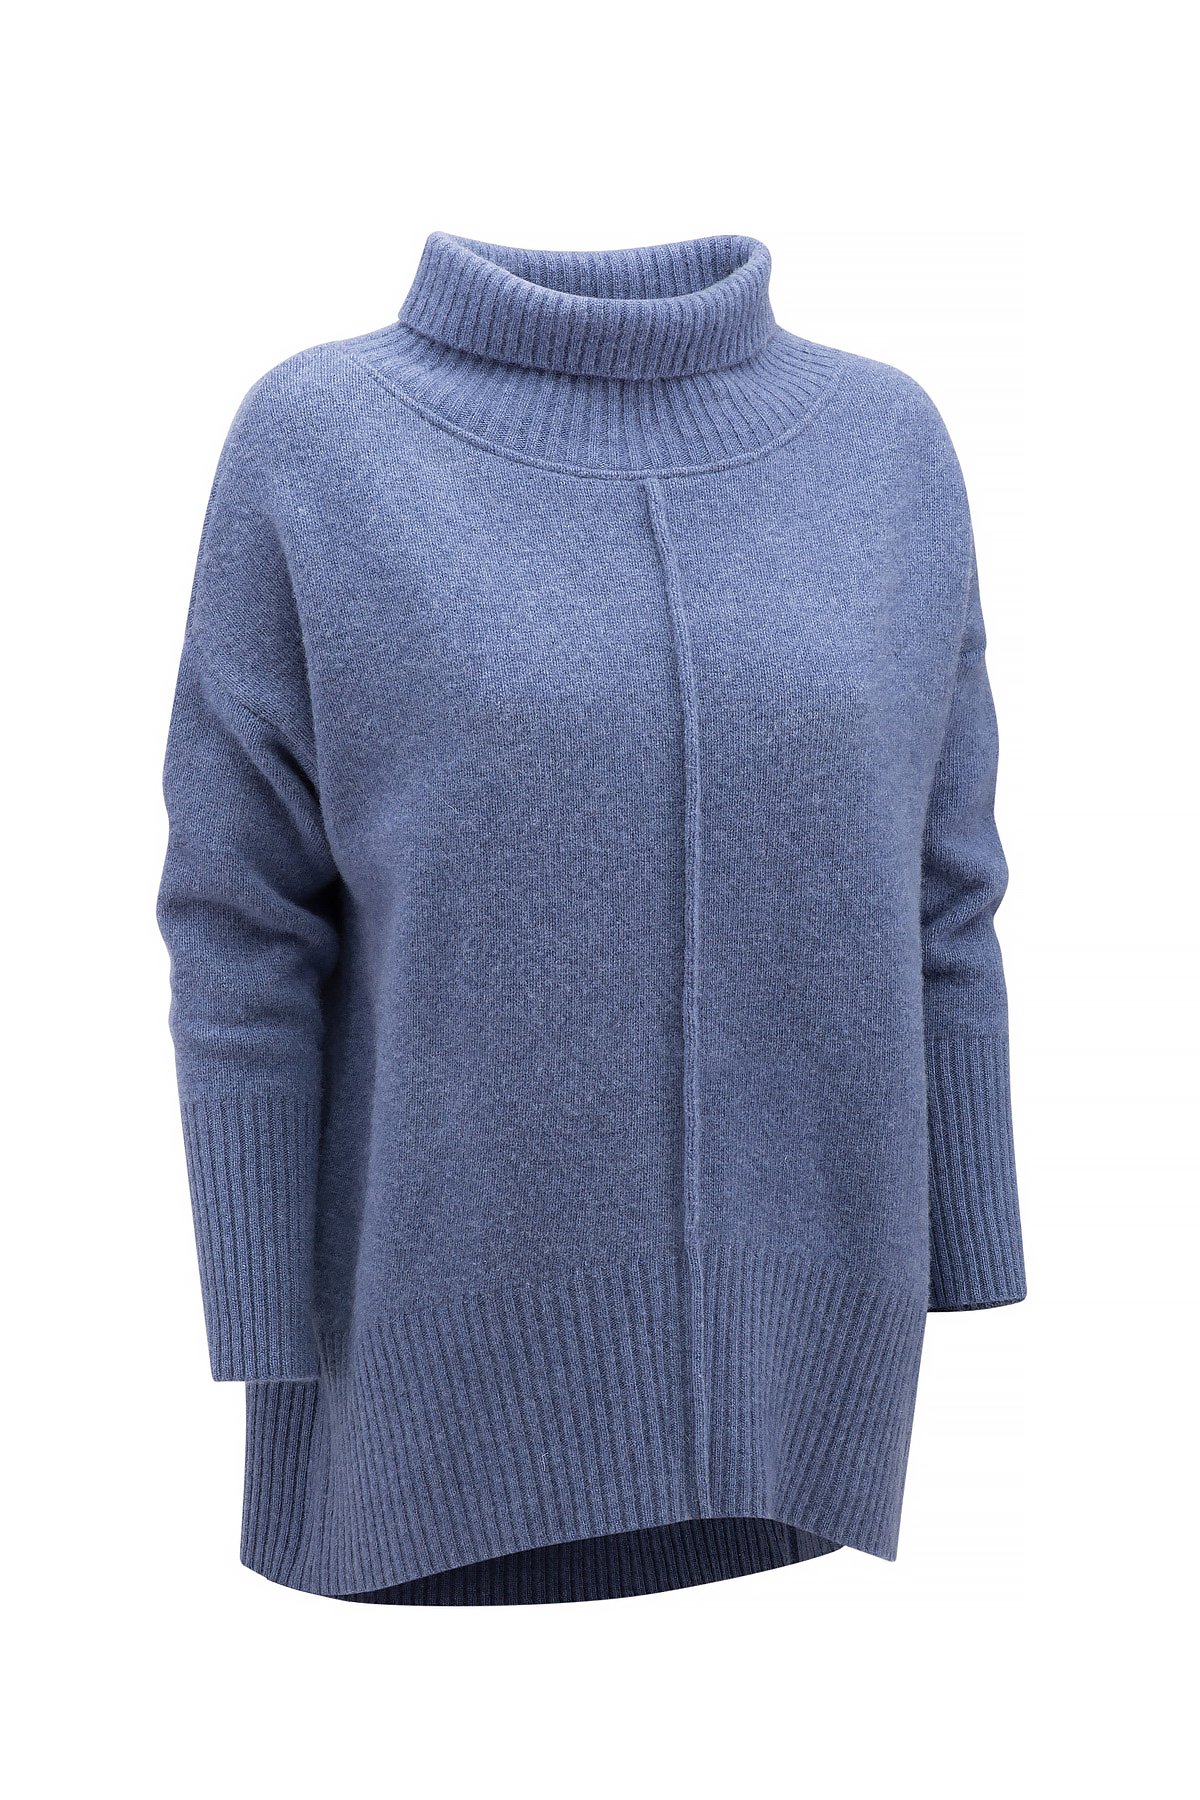 Image of a low turtle neck jumper